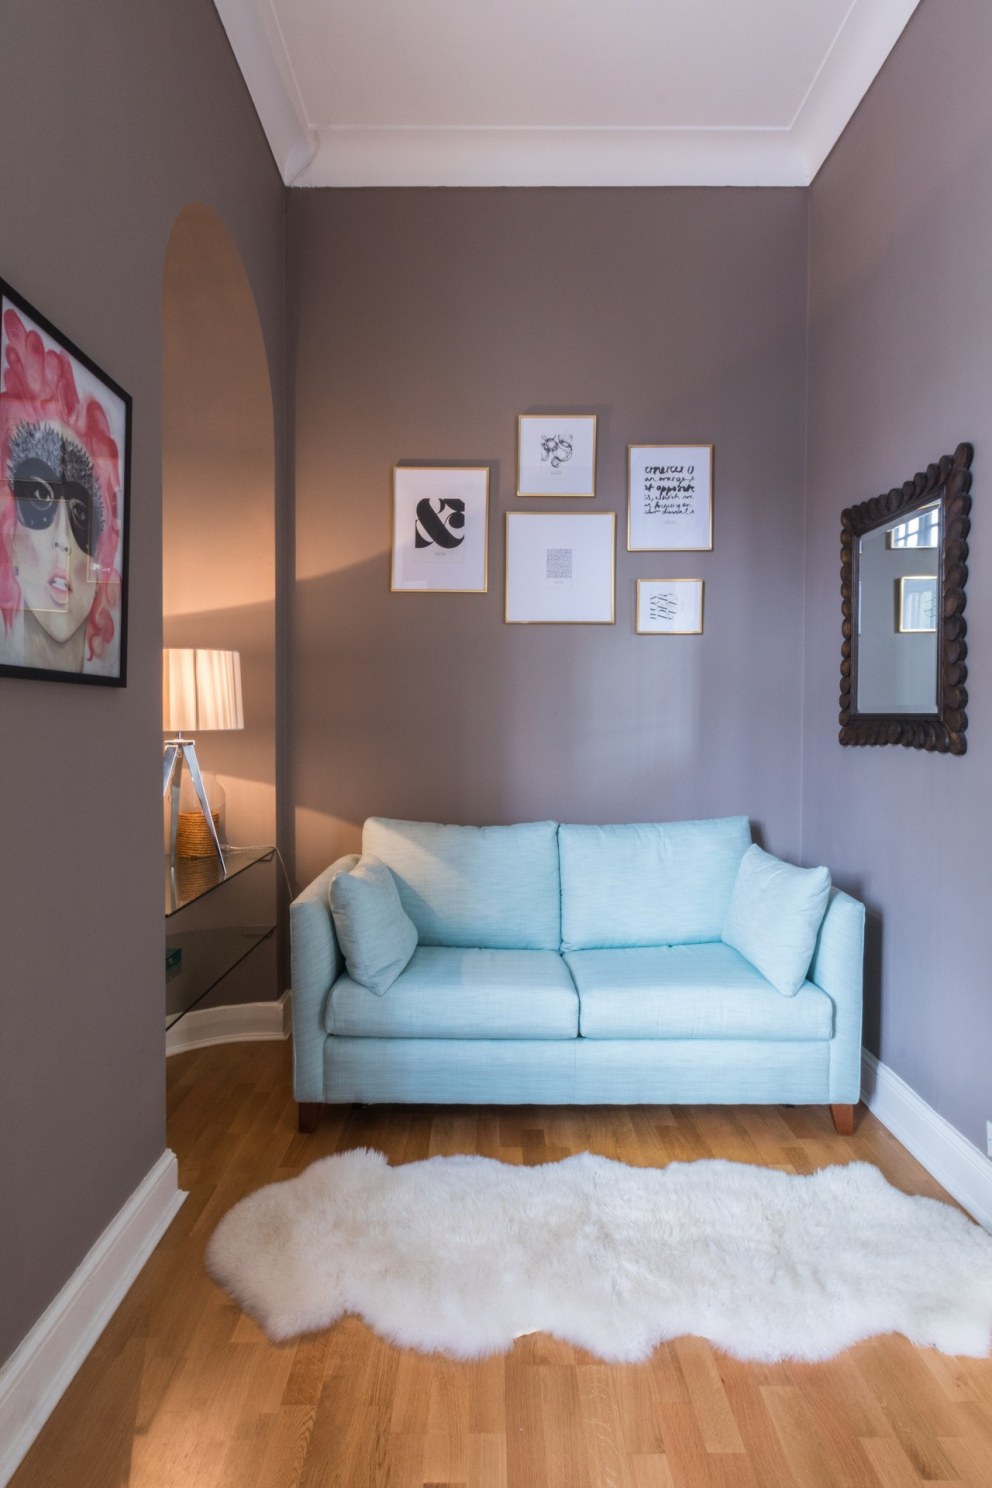 kings road flat | Office/Spare room | Interior Designers